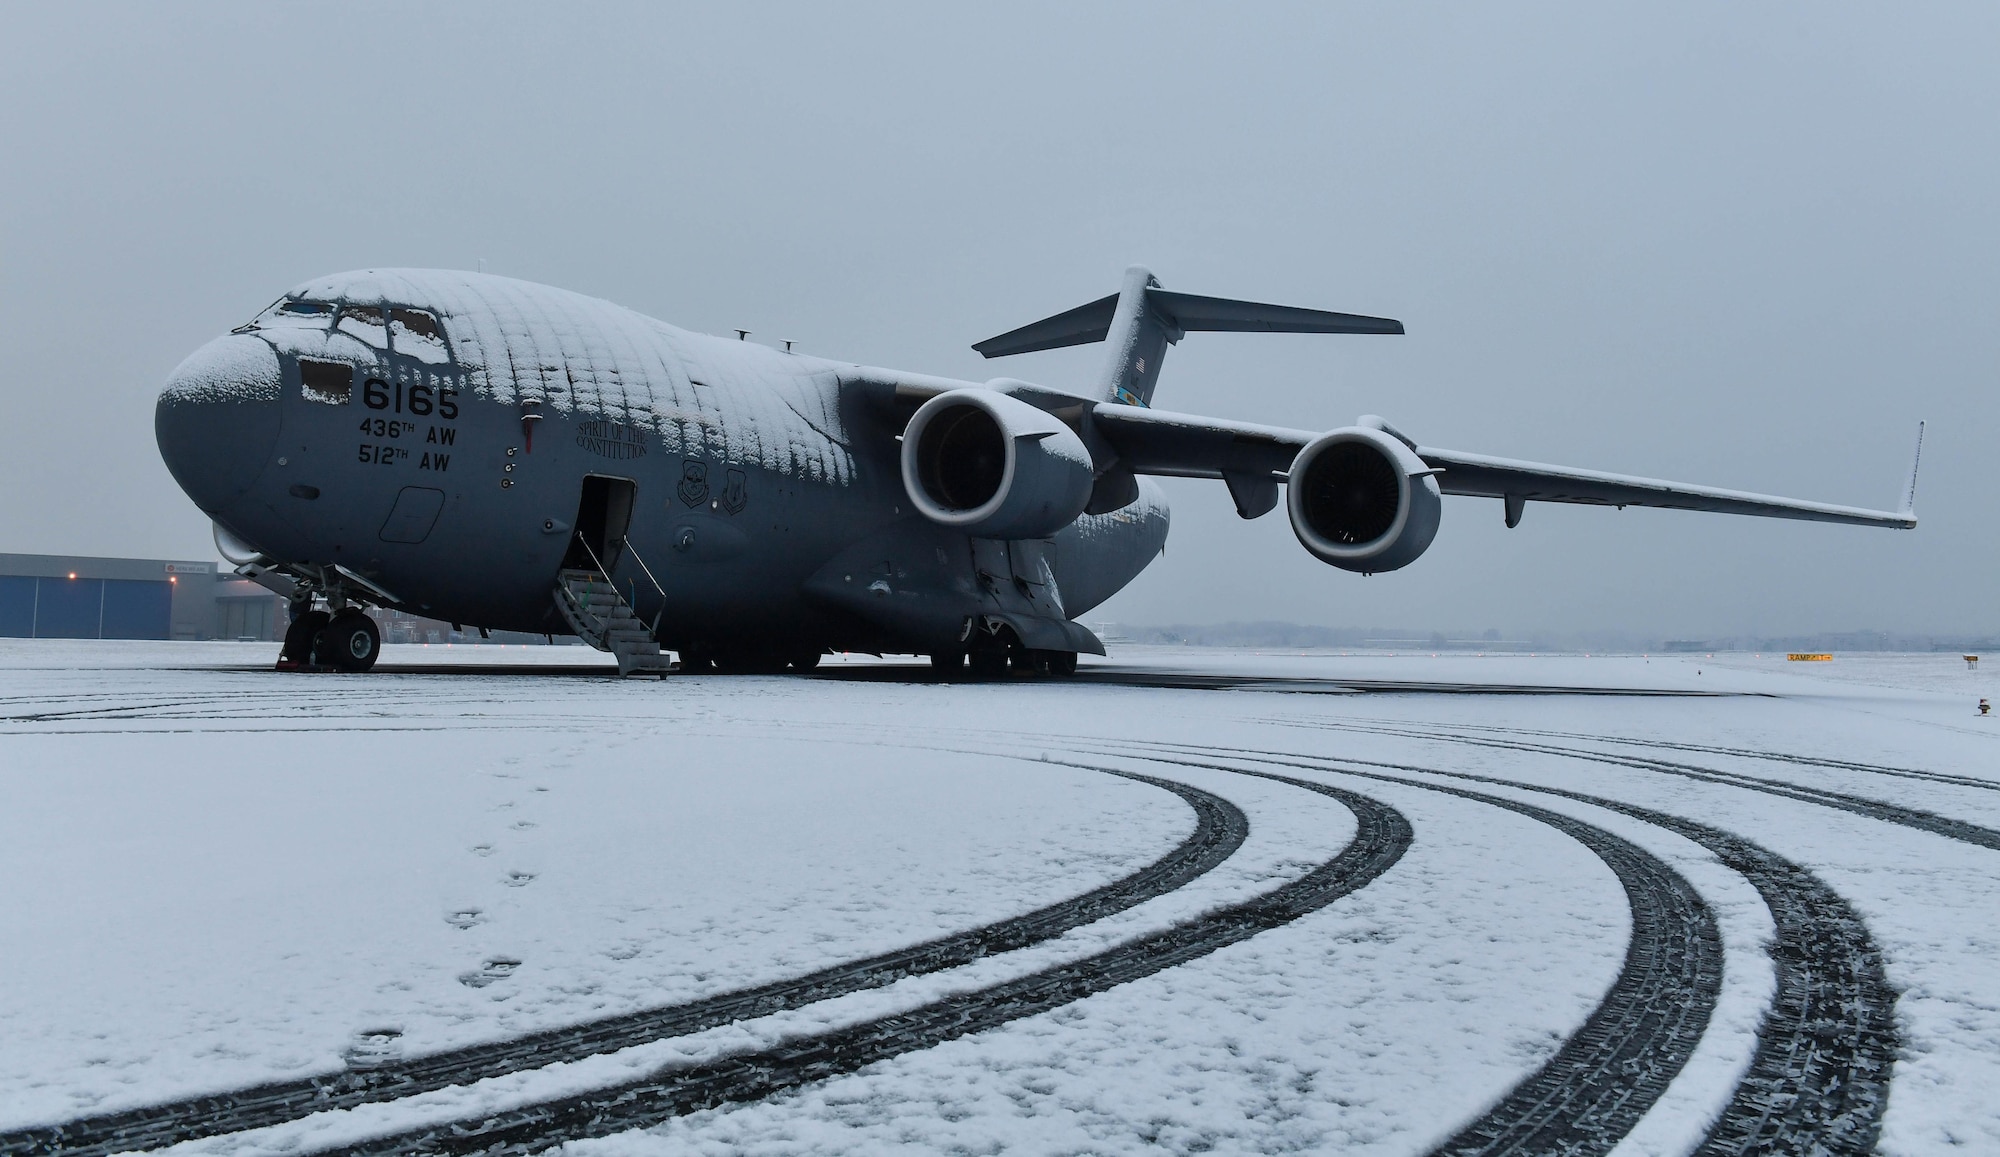 A C-17 Globemaster III is covered in snow in Cologne, Germany, Feb 11, 2017. A 721st Aircraft Maintenance Squadron maintenance recovery team was sent from Ramstein Air Base to fix a number four main fuel tank leak on the aircraft. The leak dripped fuel behind the number four engine exhaust, preventing the crew from flying until it was fixed. (U.S Air Force photo by Senior Airman Tryphena Mayhugh)